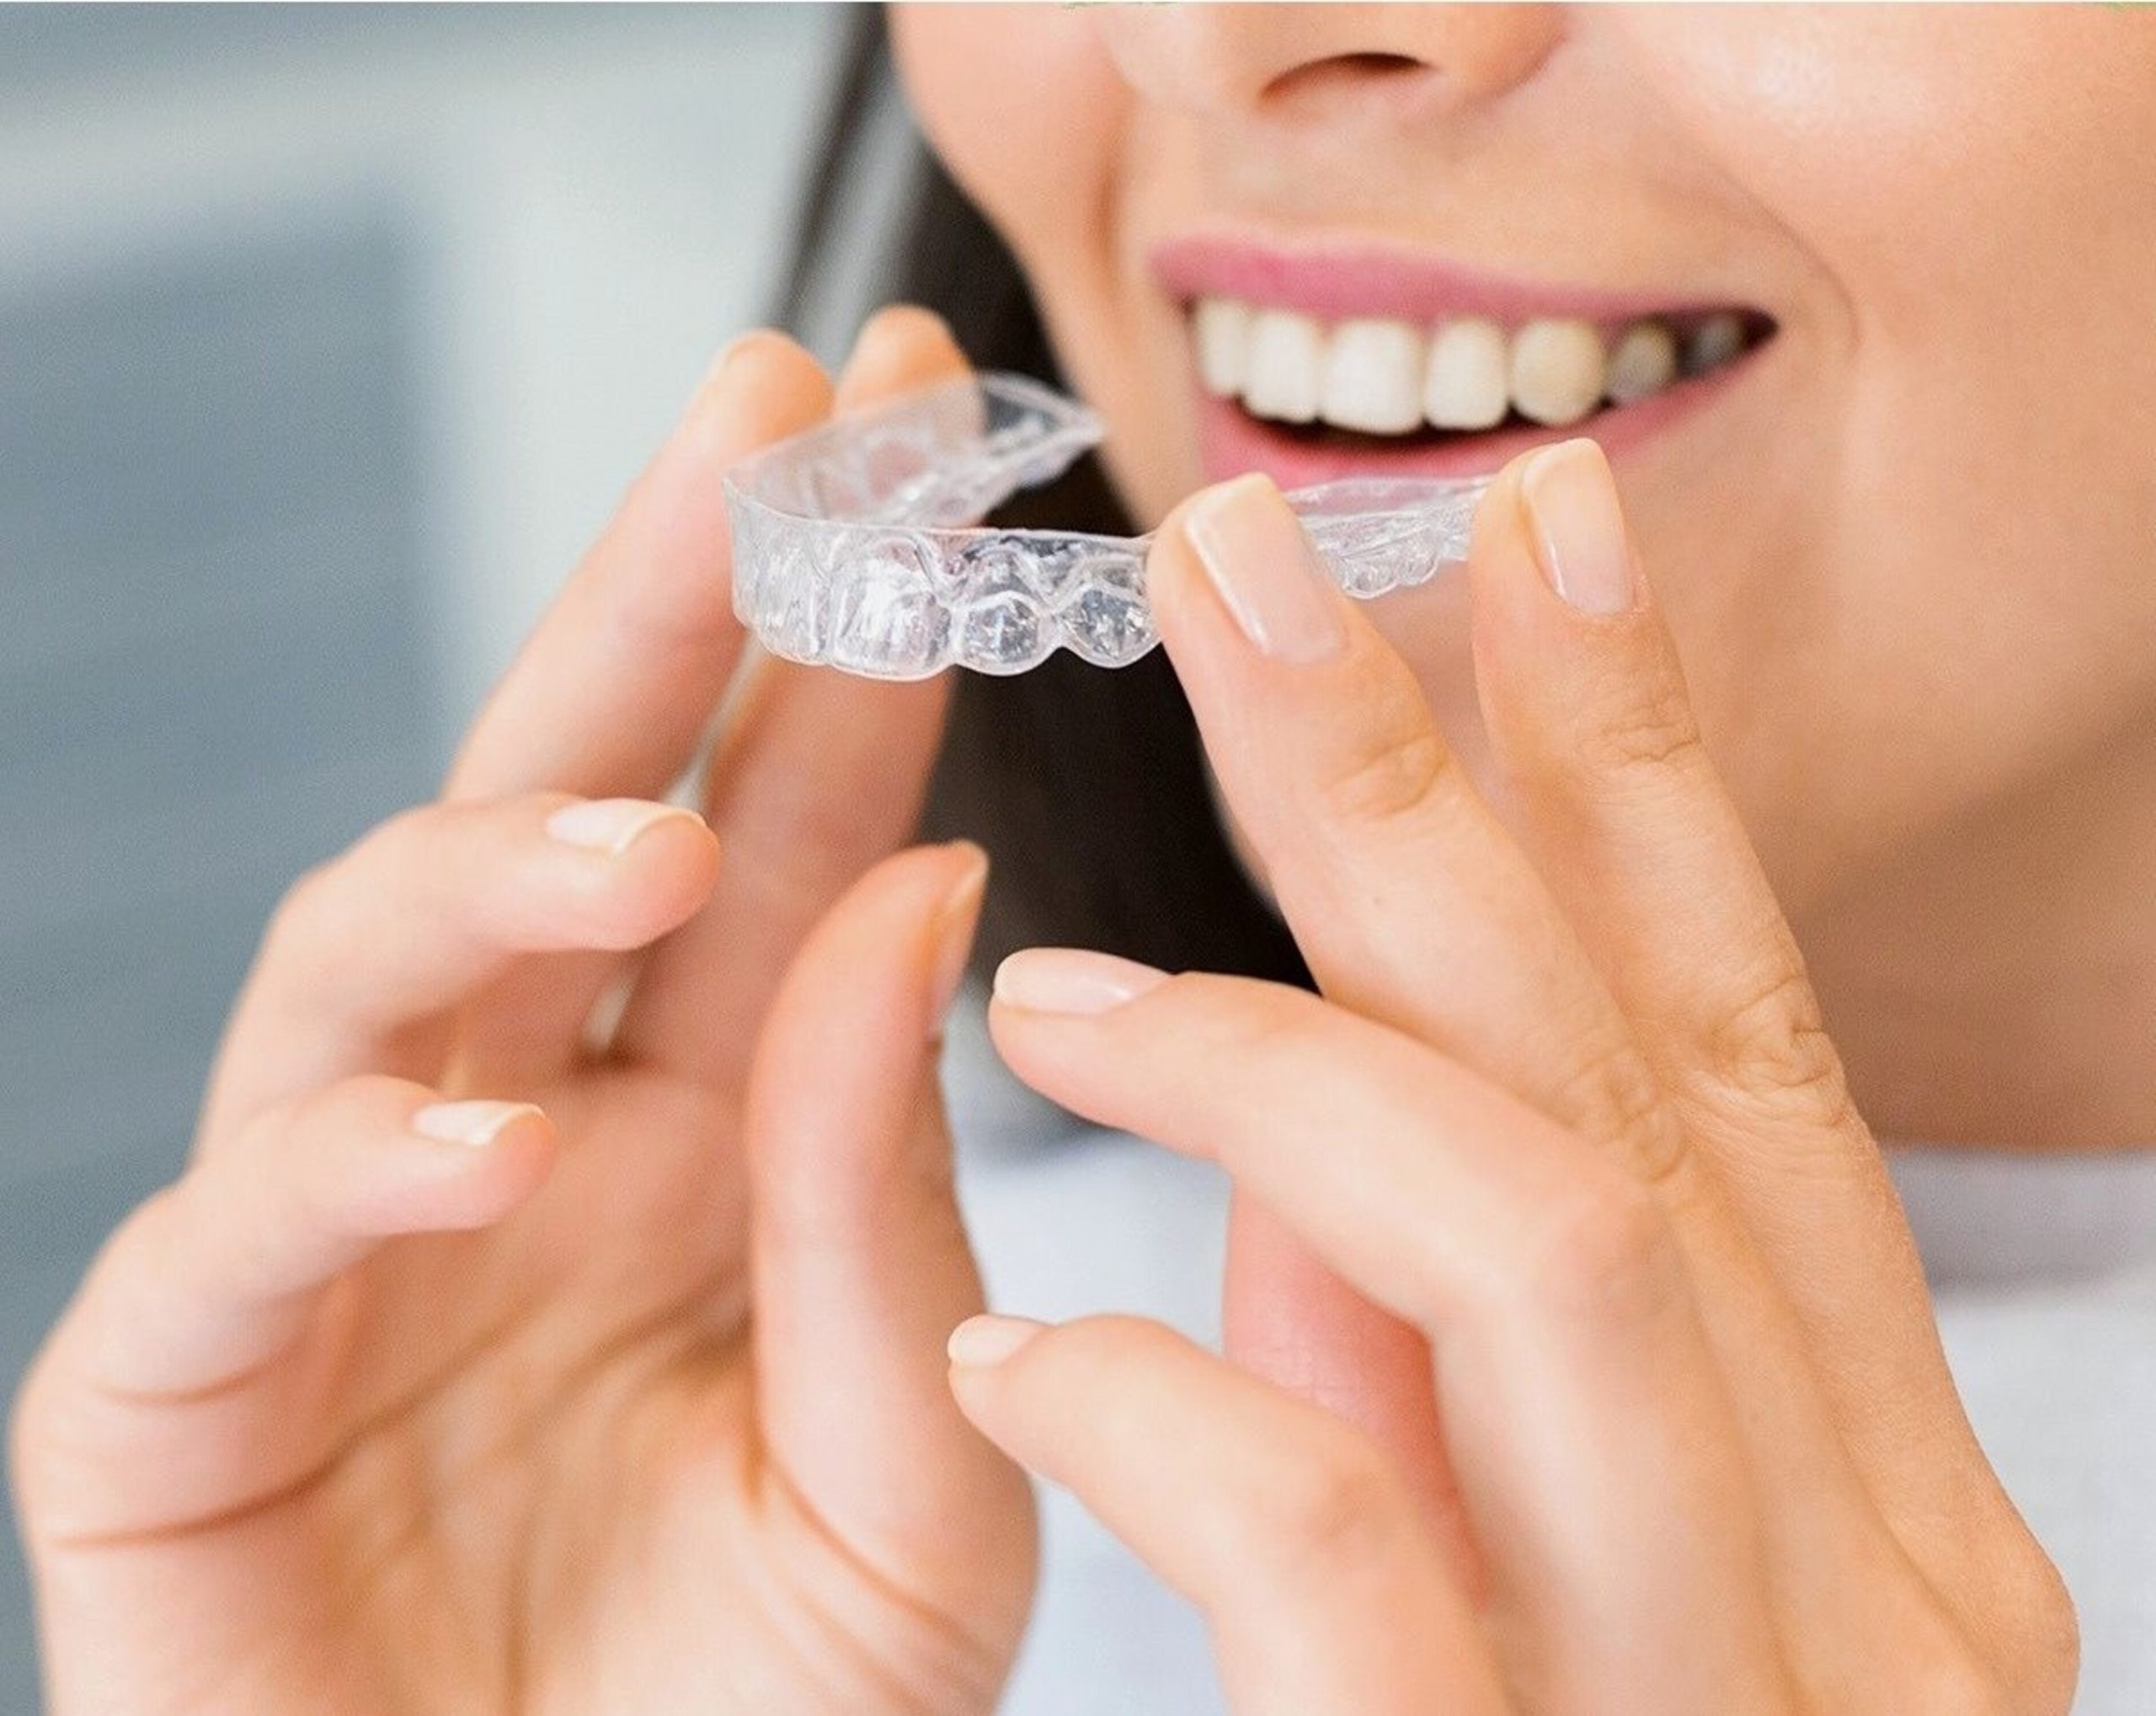 A woman smiling and holding the Invisalign Aligners towards her mouth